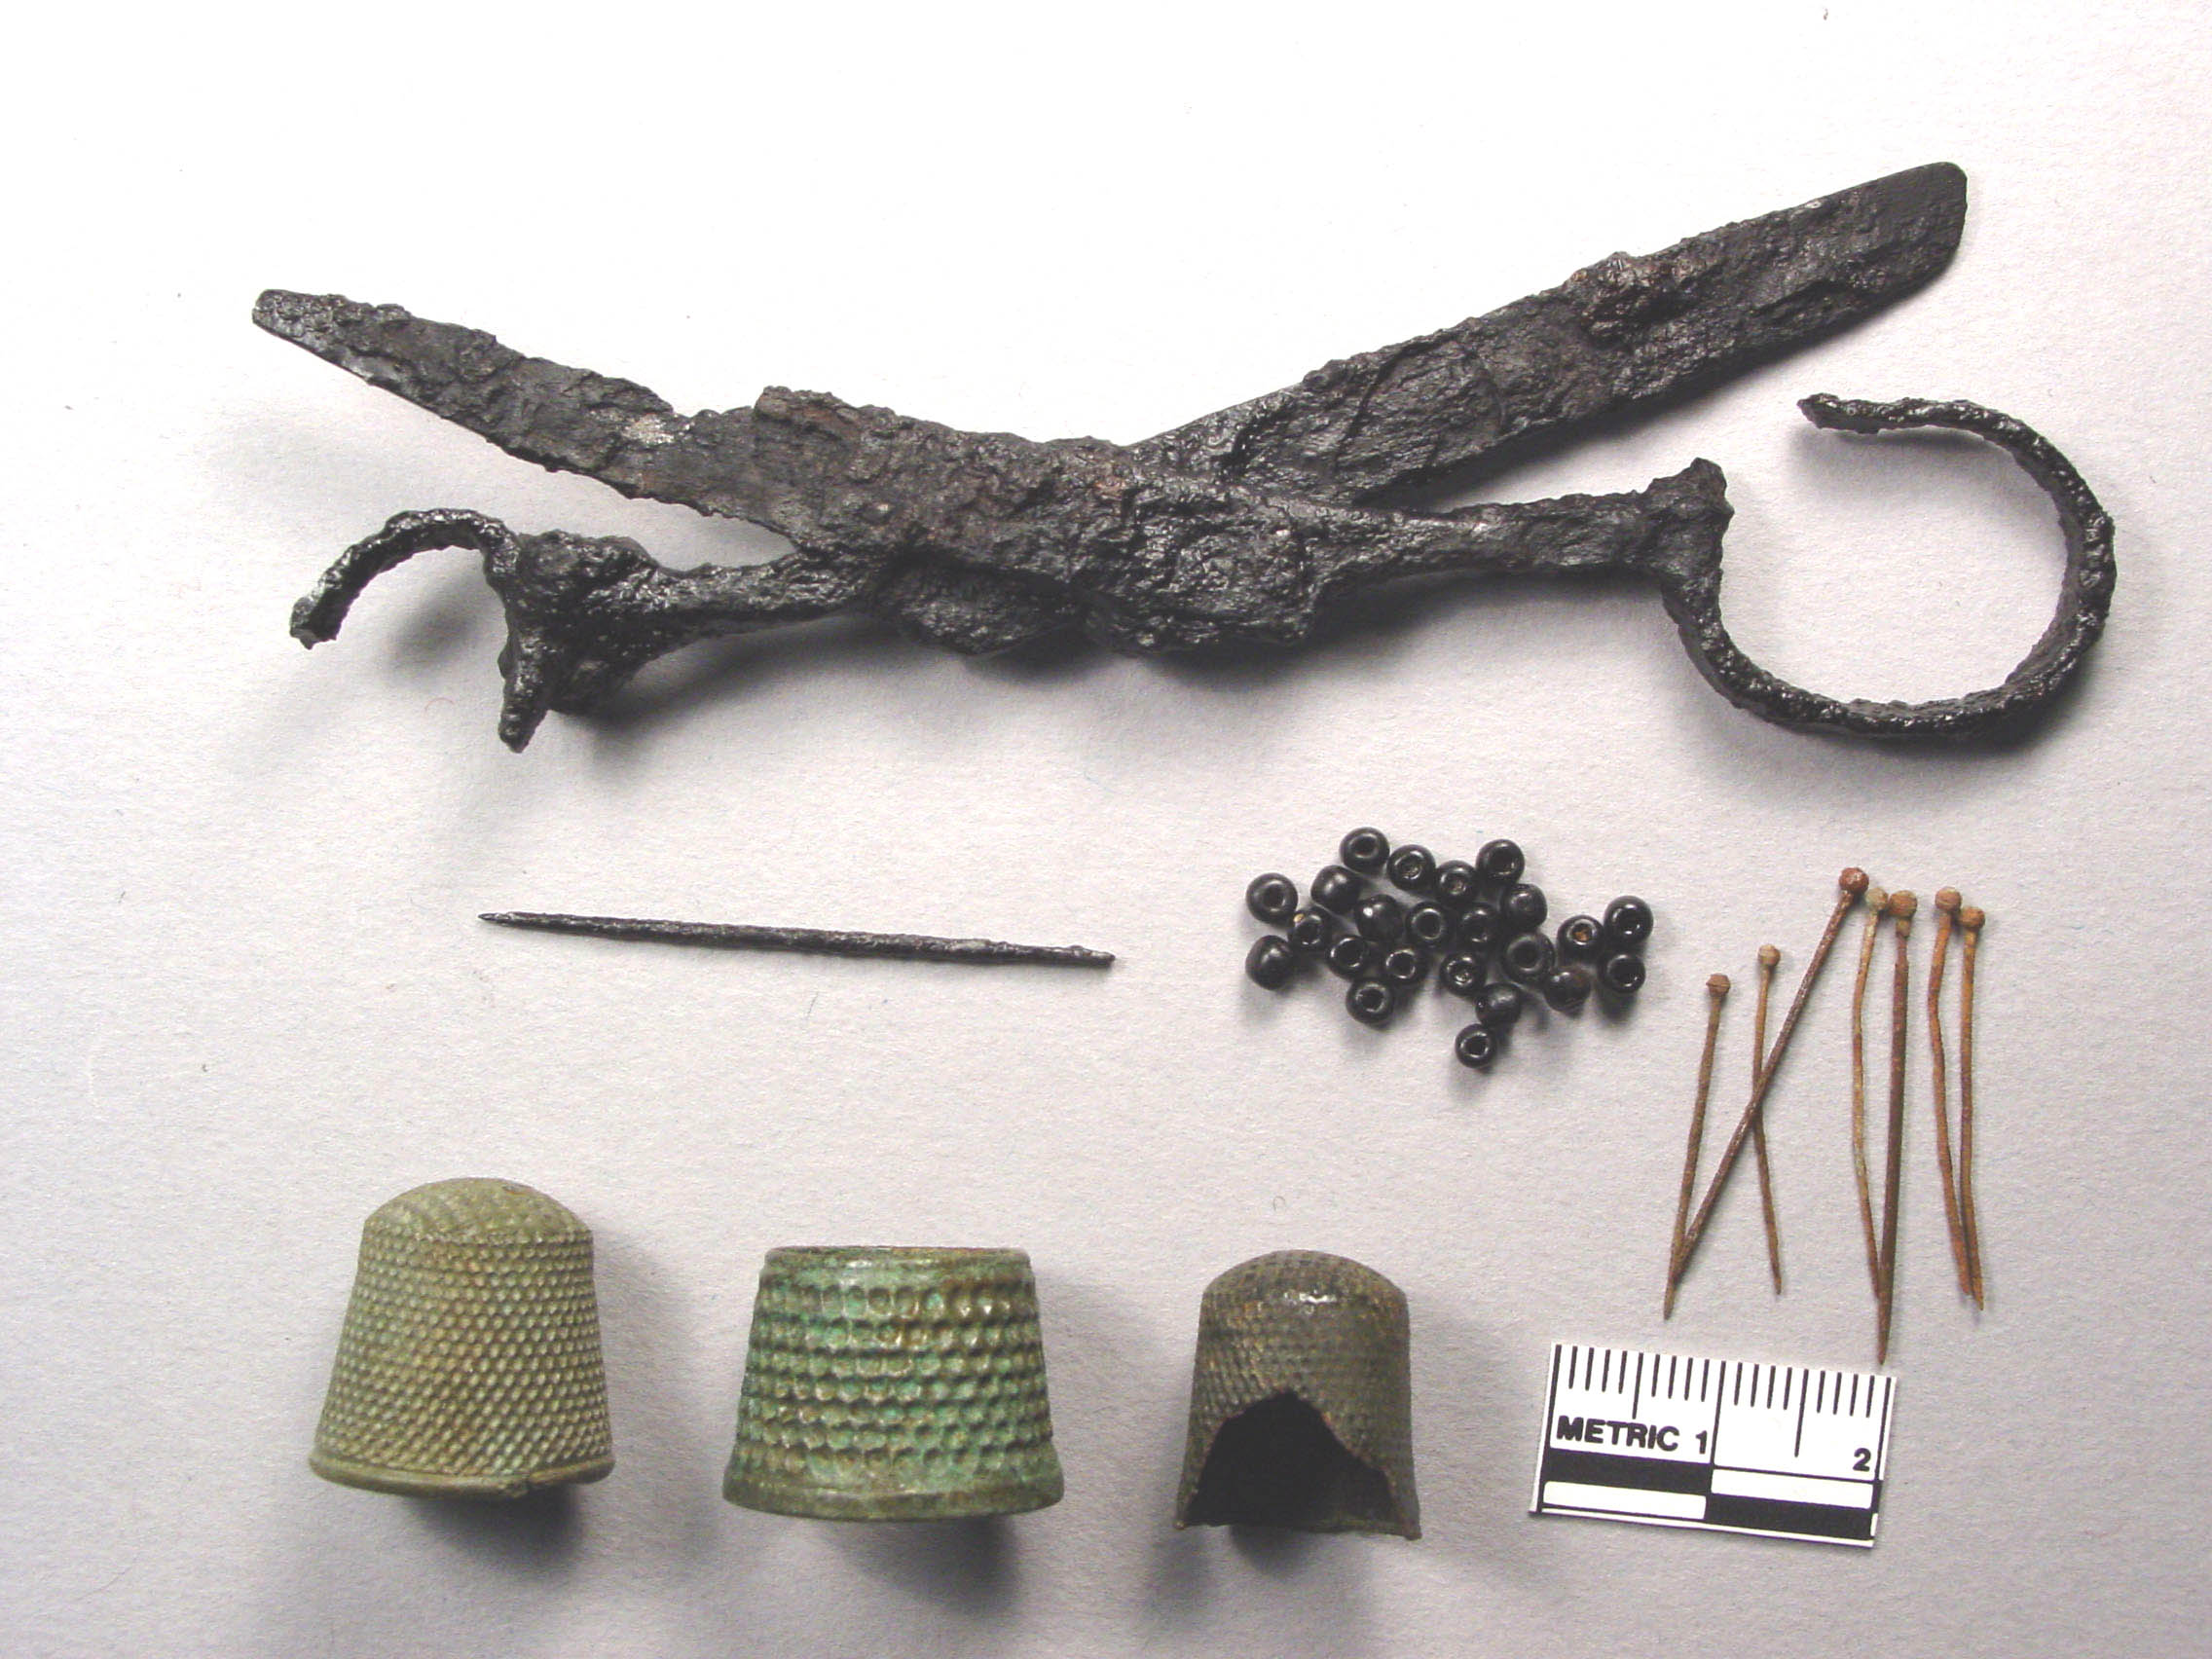 Image of sewing-related artifacts